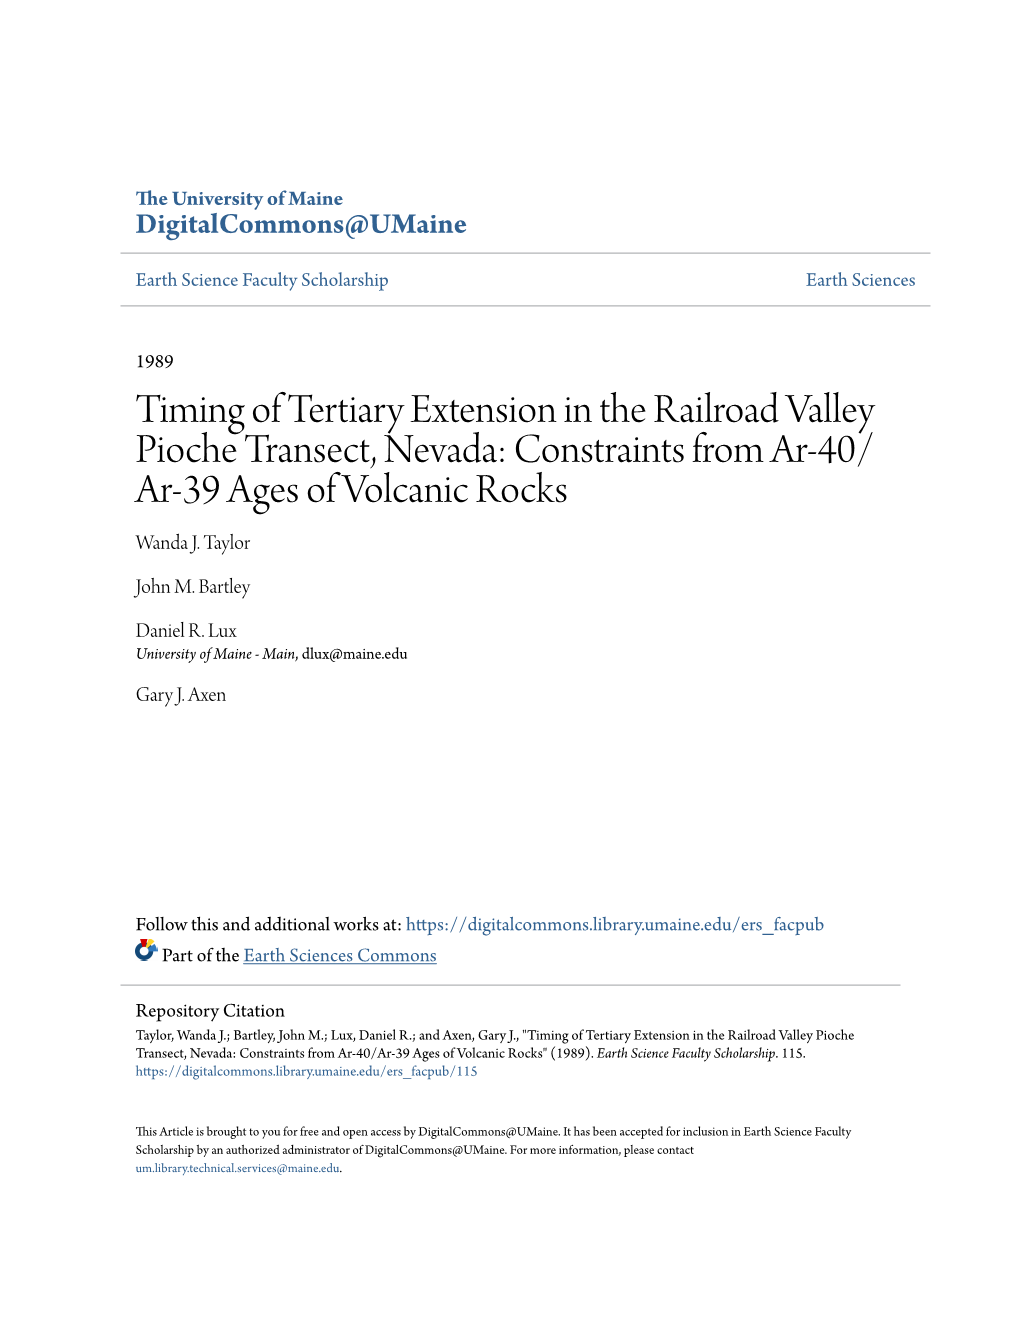 Timing of Tertiary Extension in the Railroad Valley Pioche Transect, Nevada: Constraints from Ar-40/ Ar-39 Ages of Volcanic Rocks Wanda J